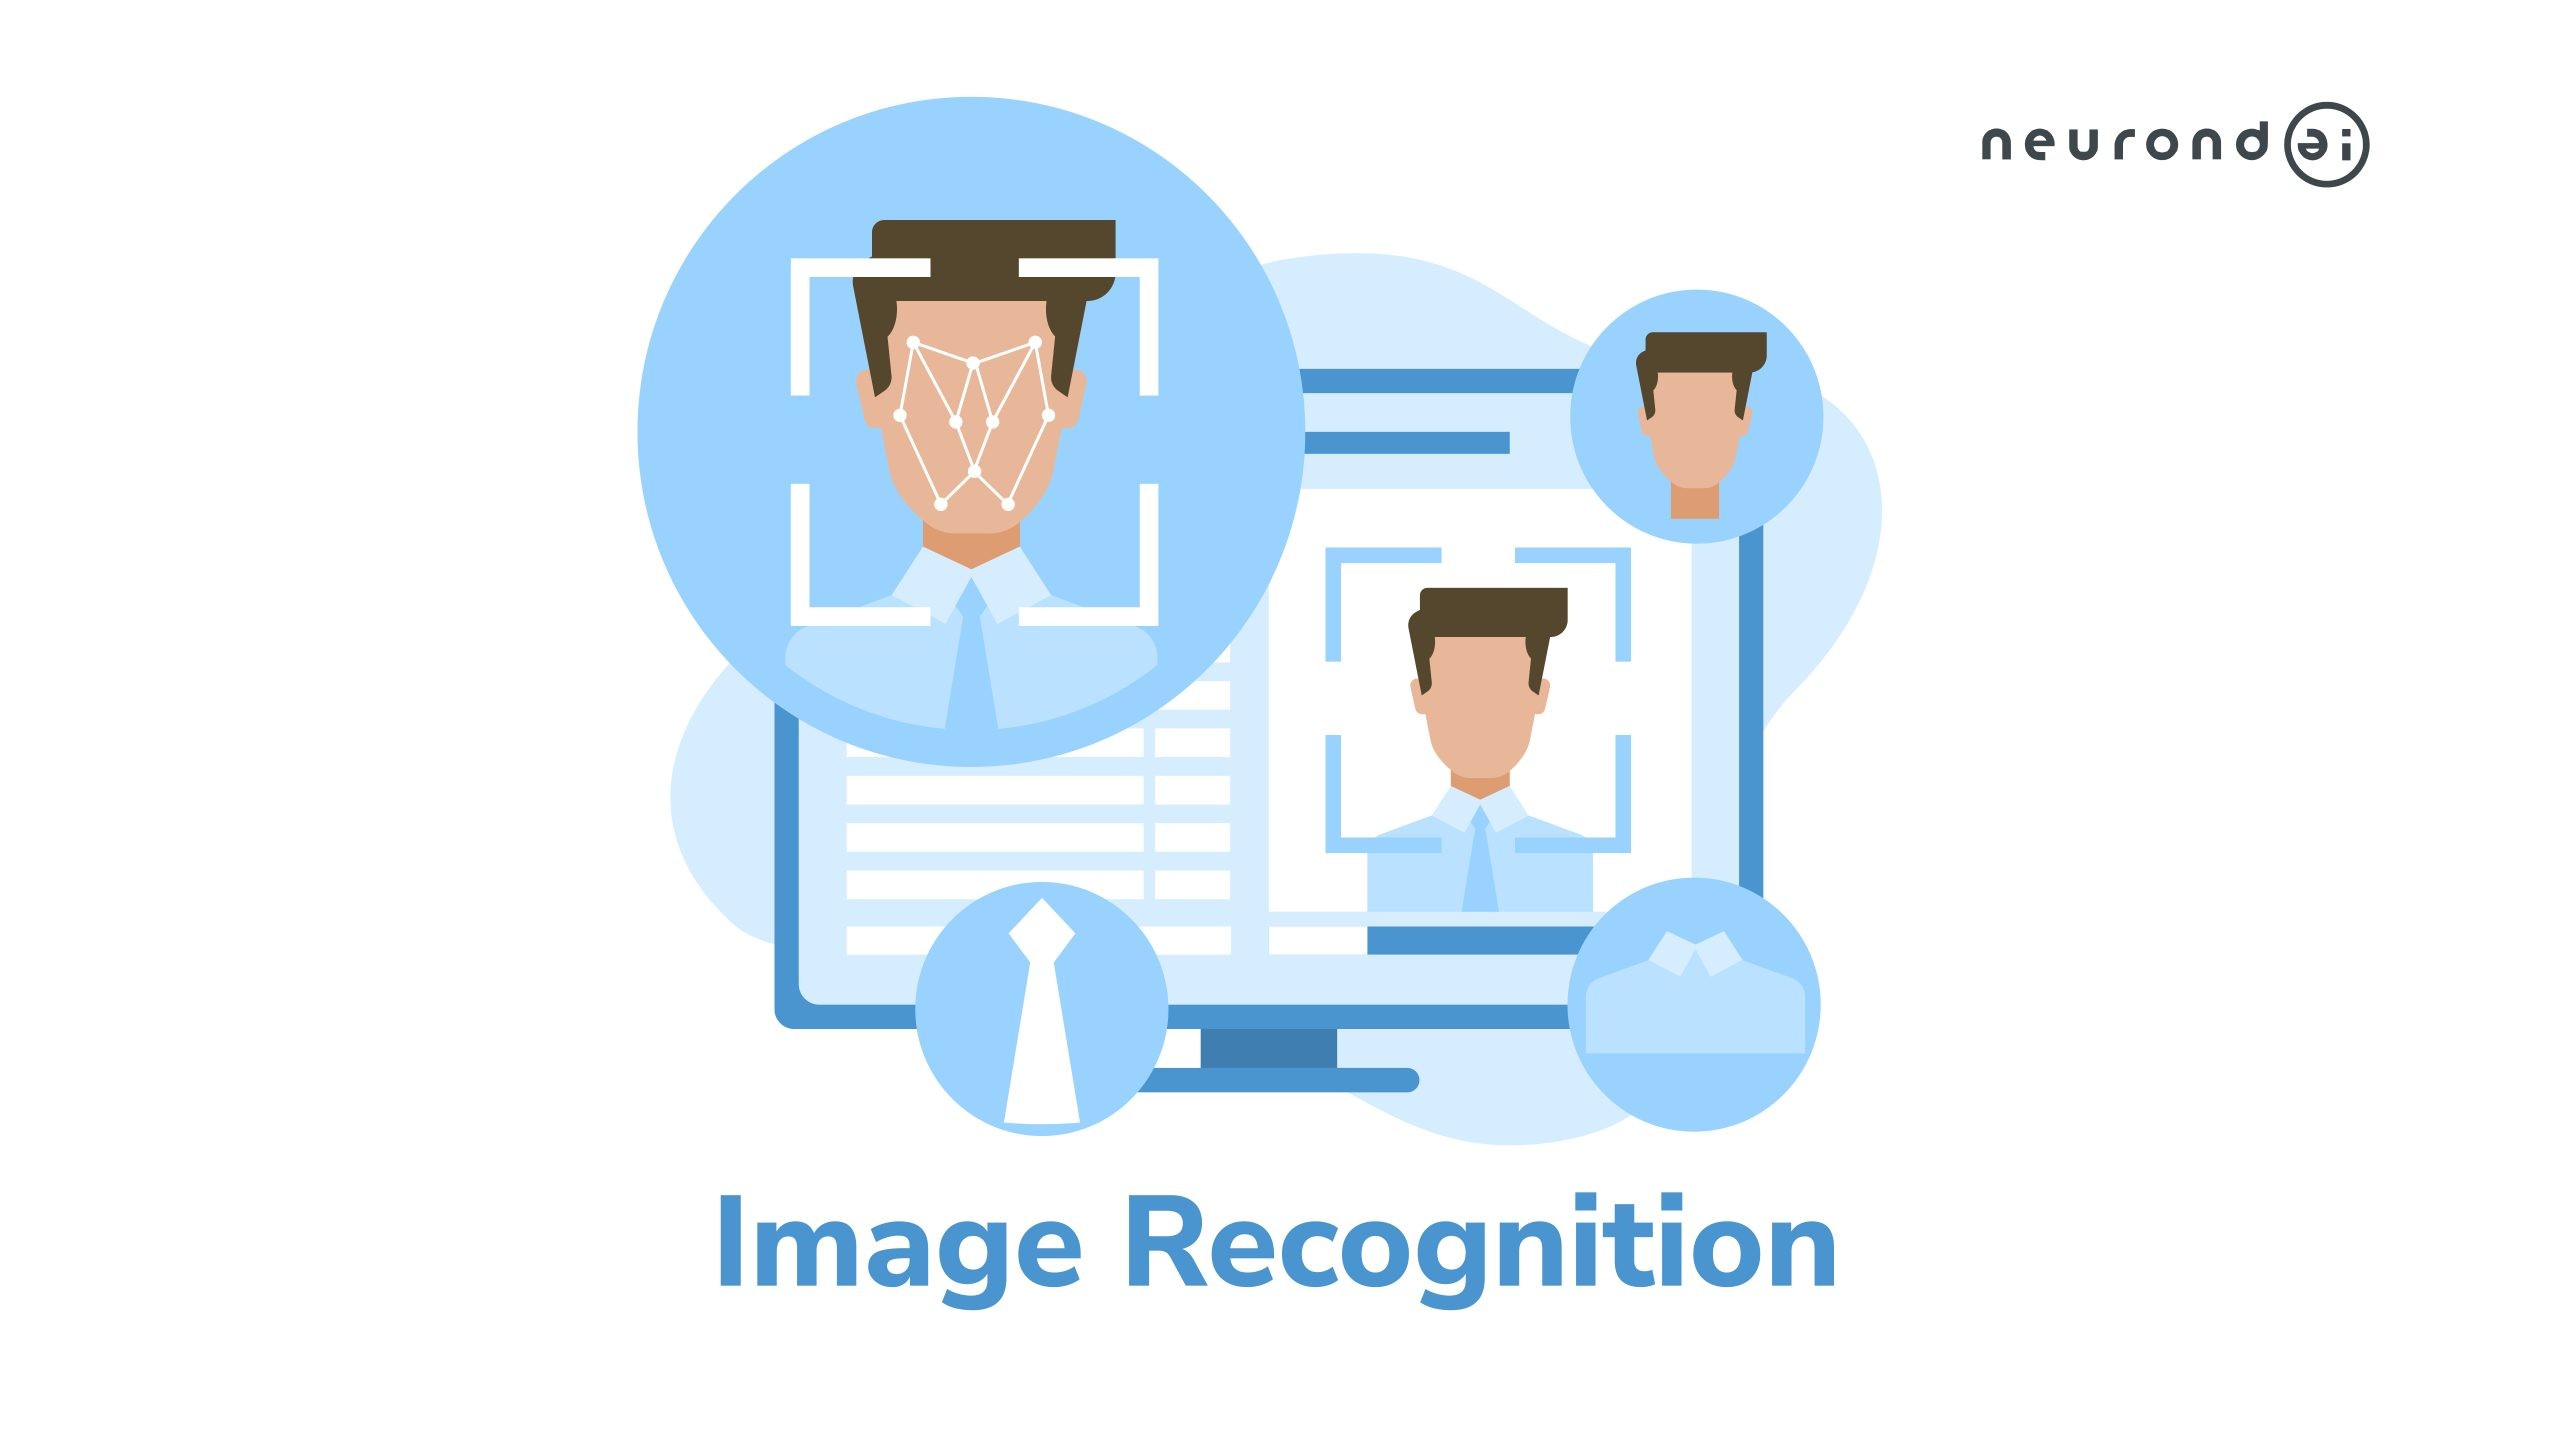 How Does Image Recognition Work?